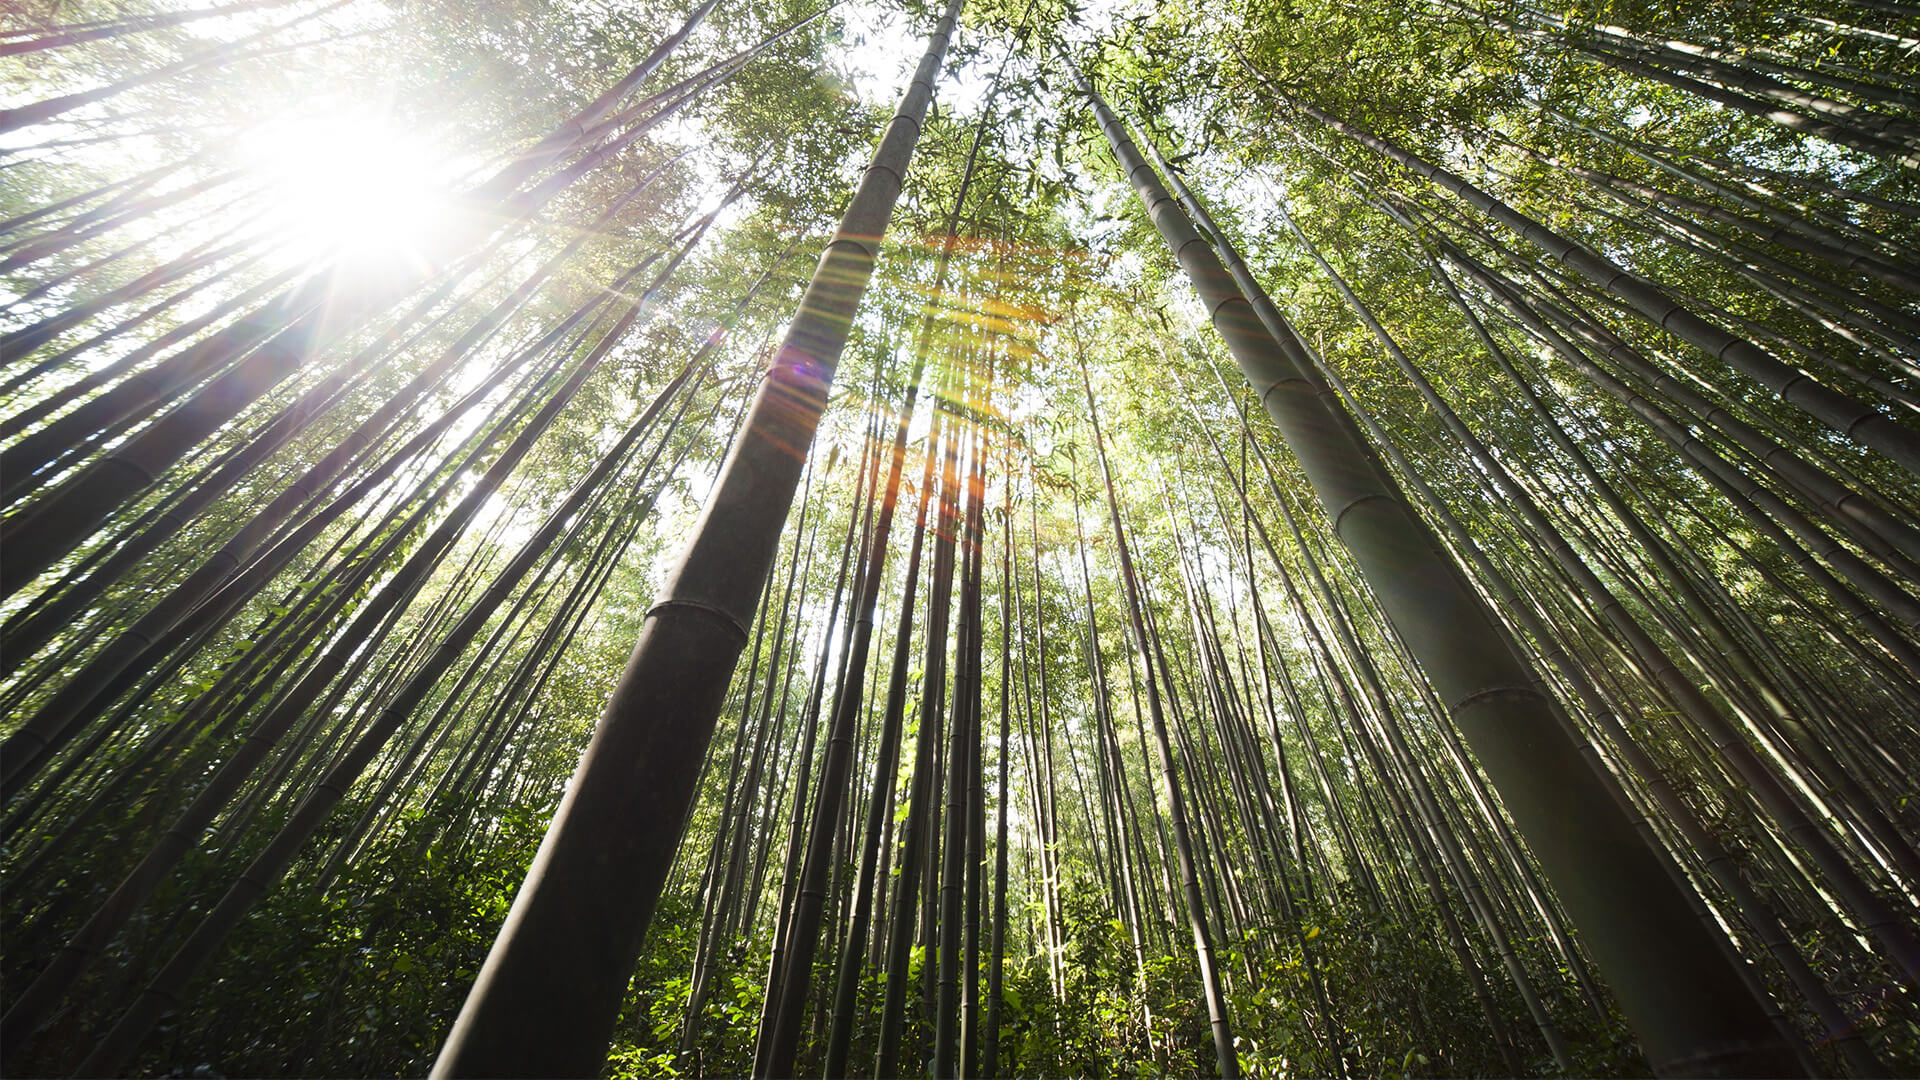 An image of trees in a forest, reaching up into a sunlit canopy. A visual metaphor for the topic of this piece: How your law firm can help to integrate ESG